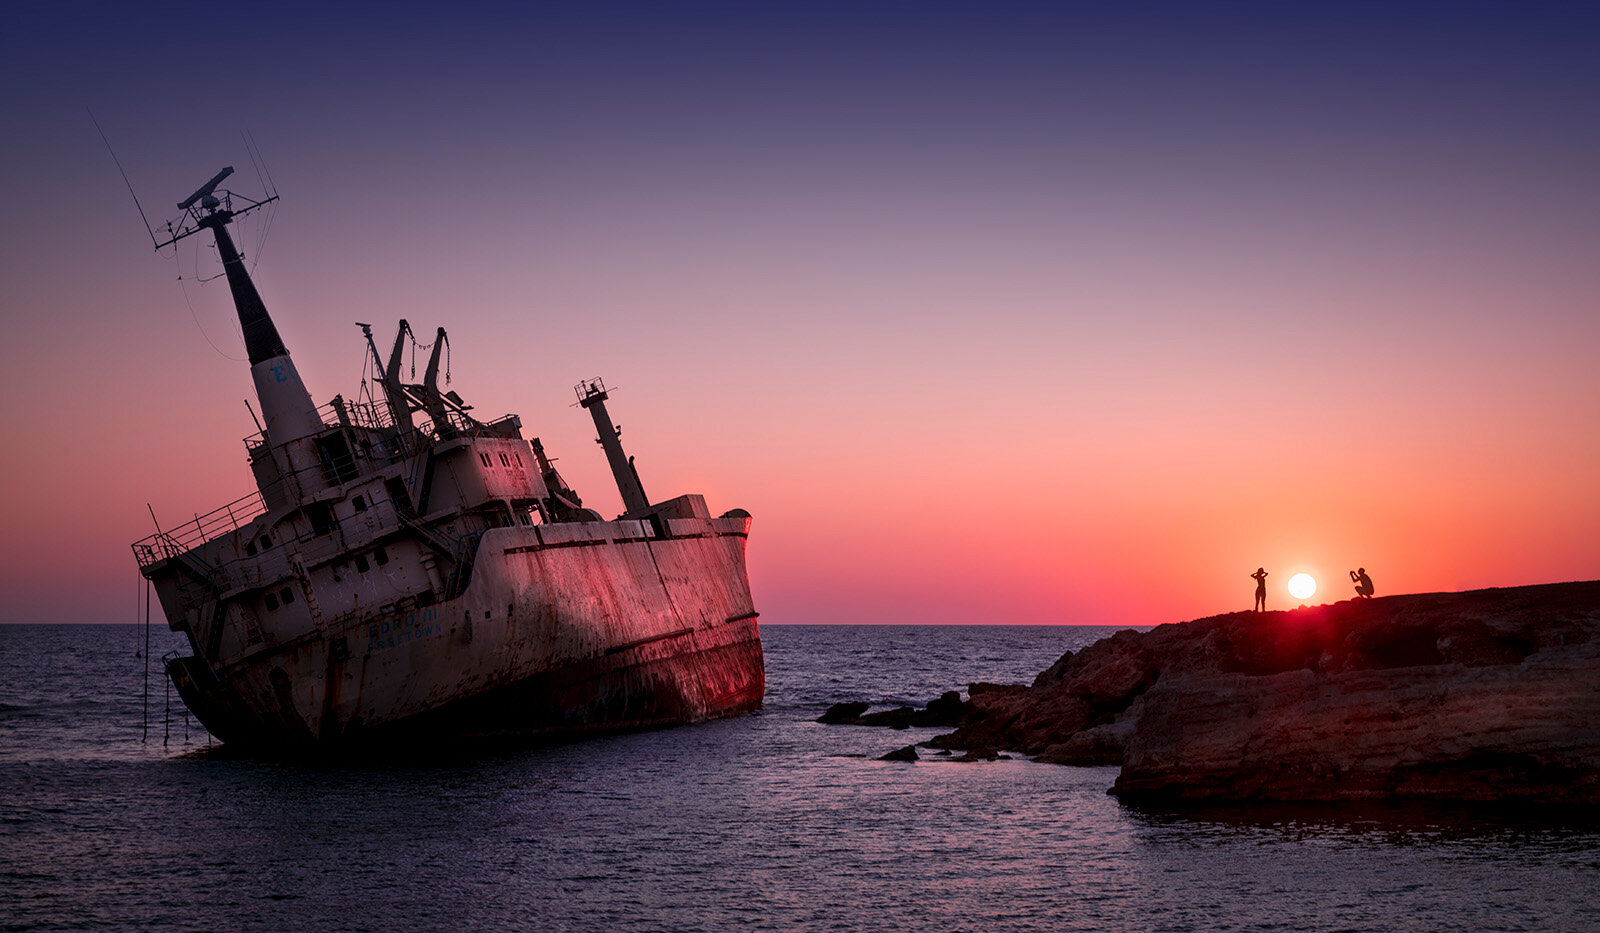 SUNSET AT THE SHIPWRECK - Neil Hall (Current POTY Champion) 